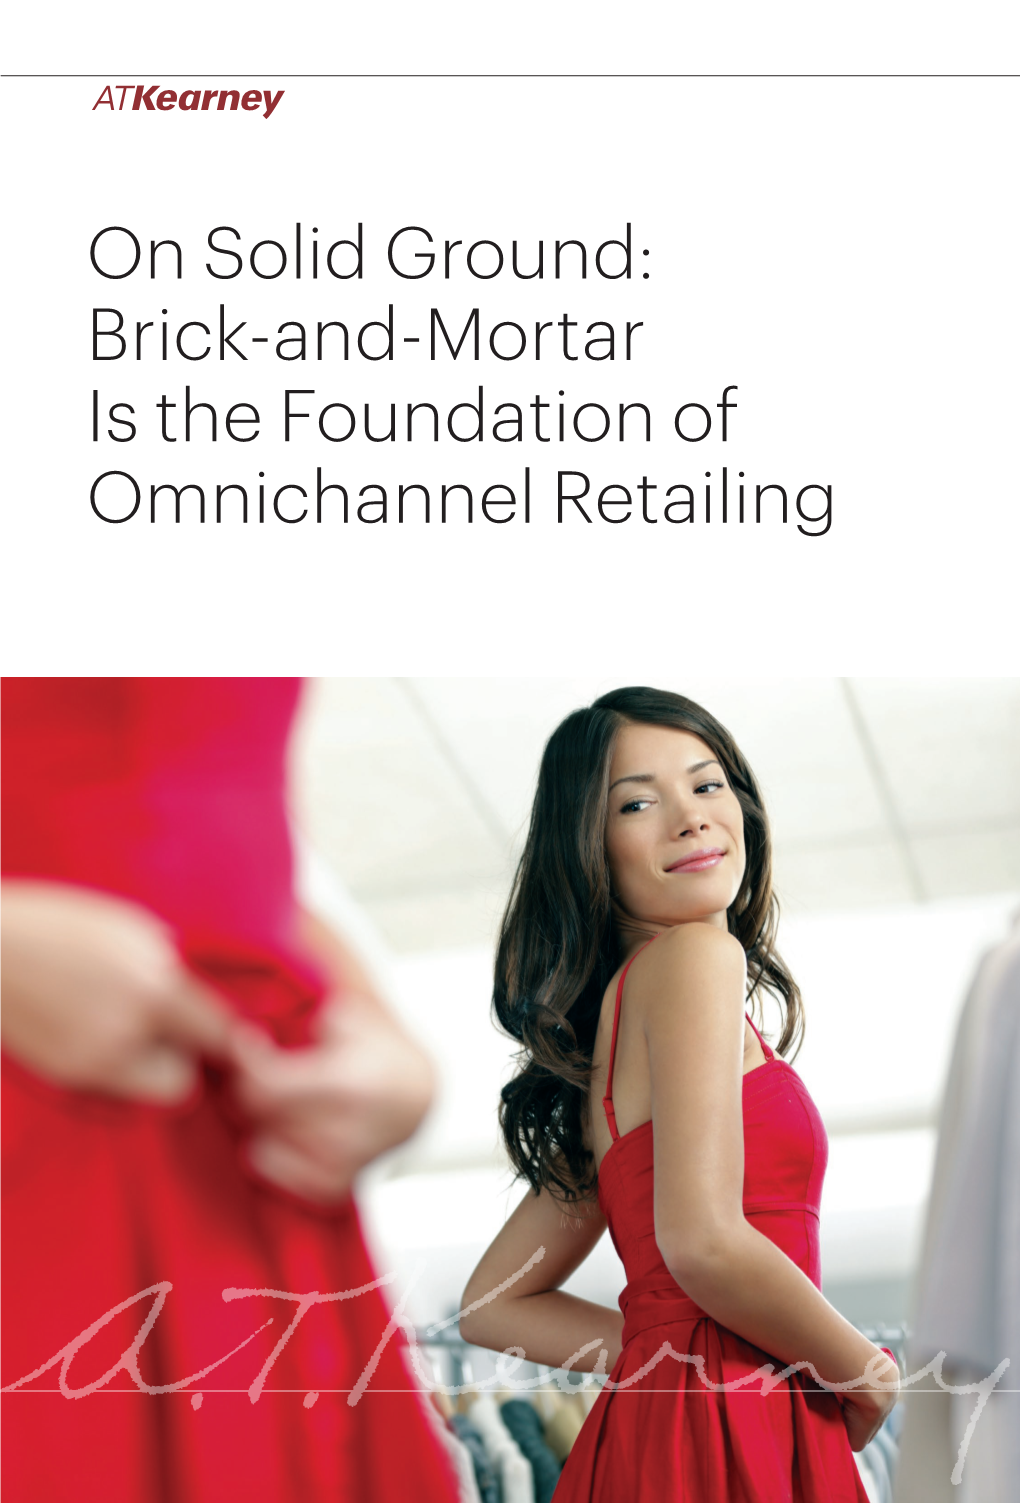 Atkearney, on Solid Ground: Brick-And-Mortar Is the Foundation of Omnichannel Retailing